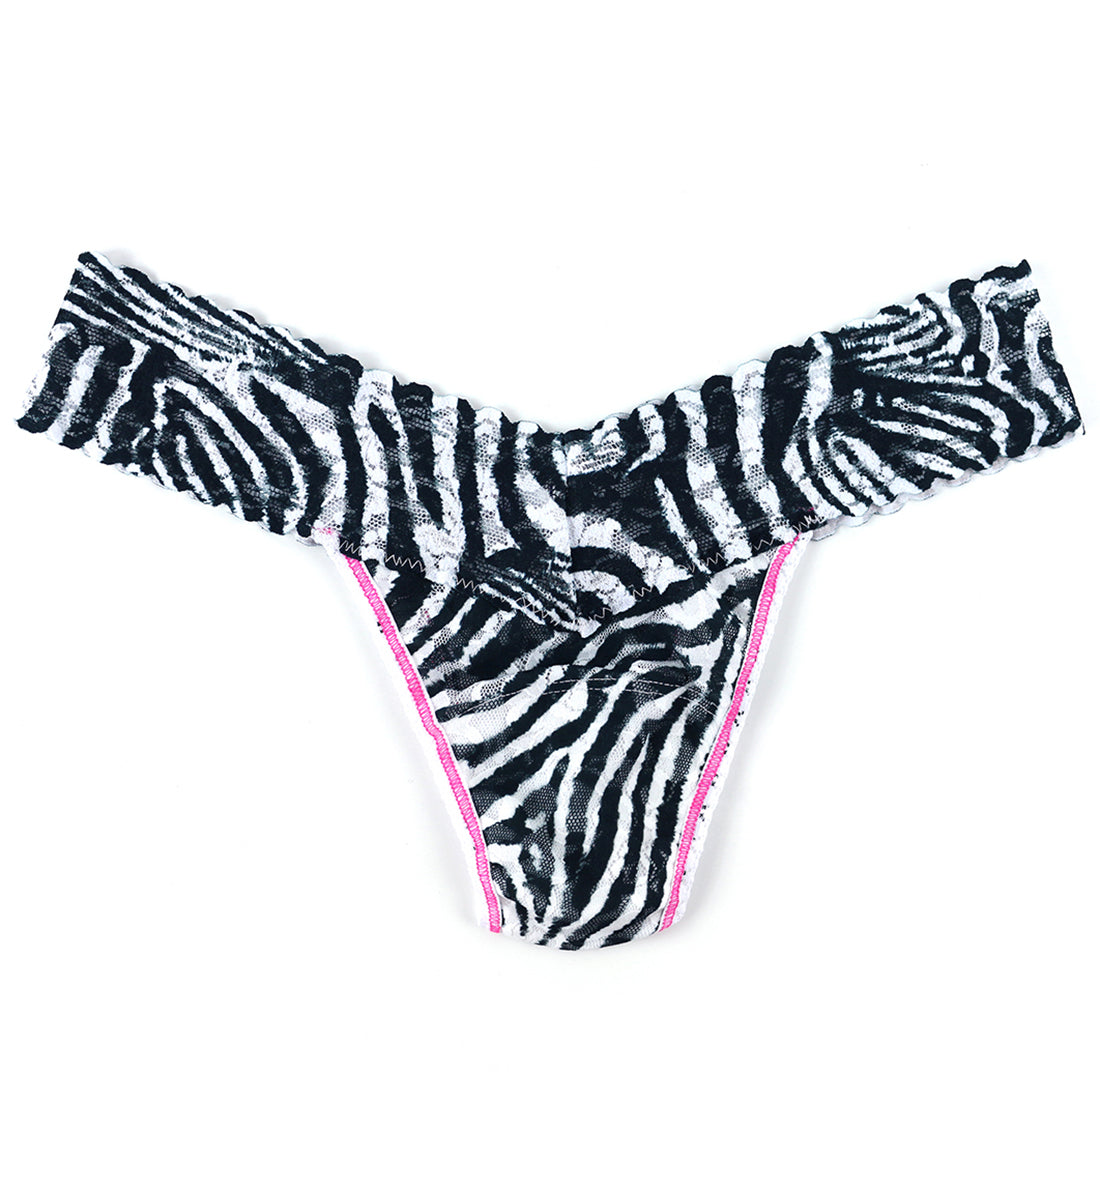 Hanky Panky Decades Aughts Zebra Low Rise Thong (MIX TAPE BOX) - Aughts Zebra,One Size